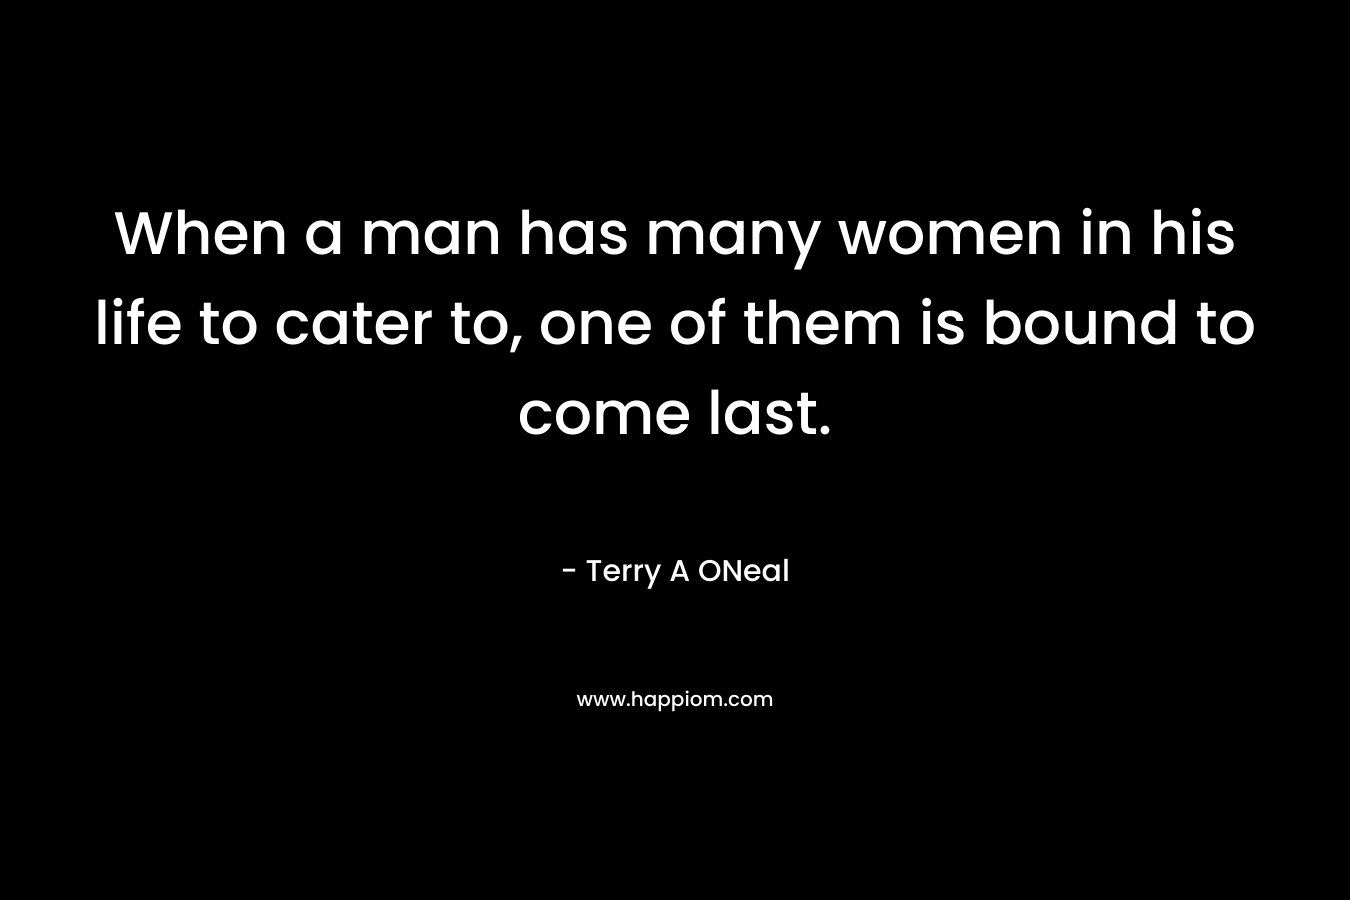 When a man has many women in his life to cater to, one of them is bound to come last. – Terry A ONeal